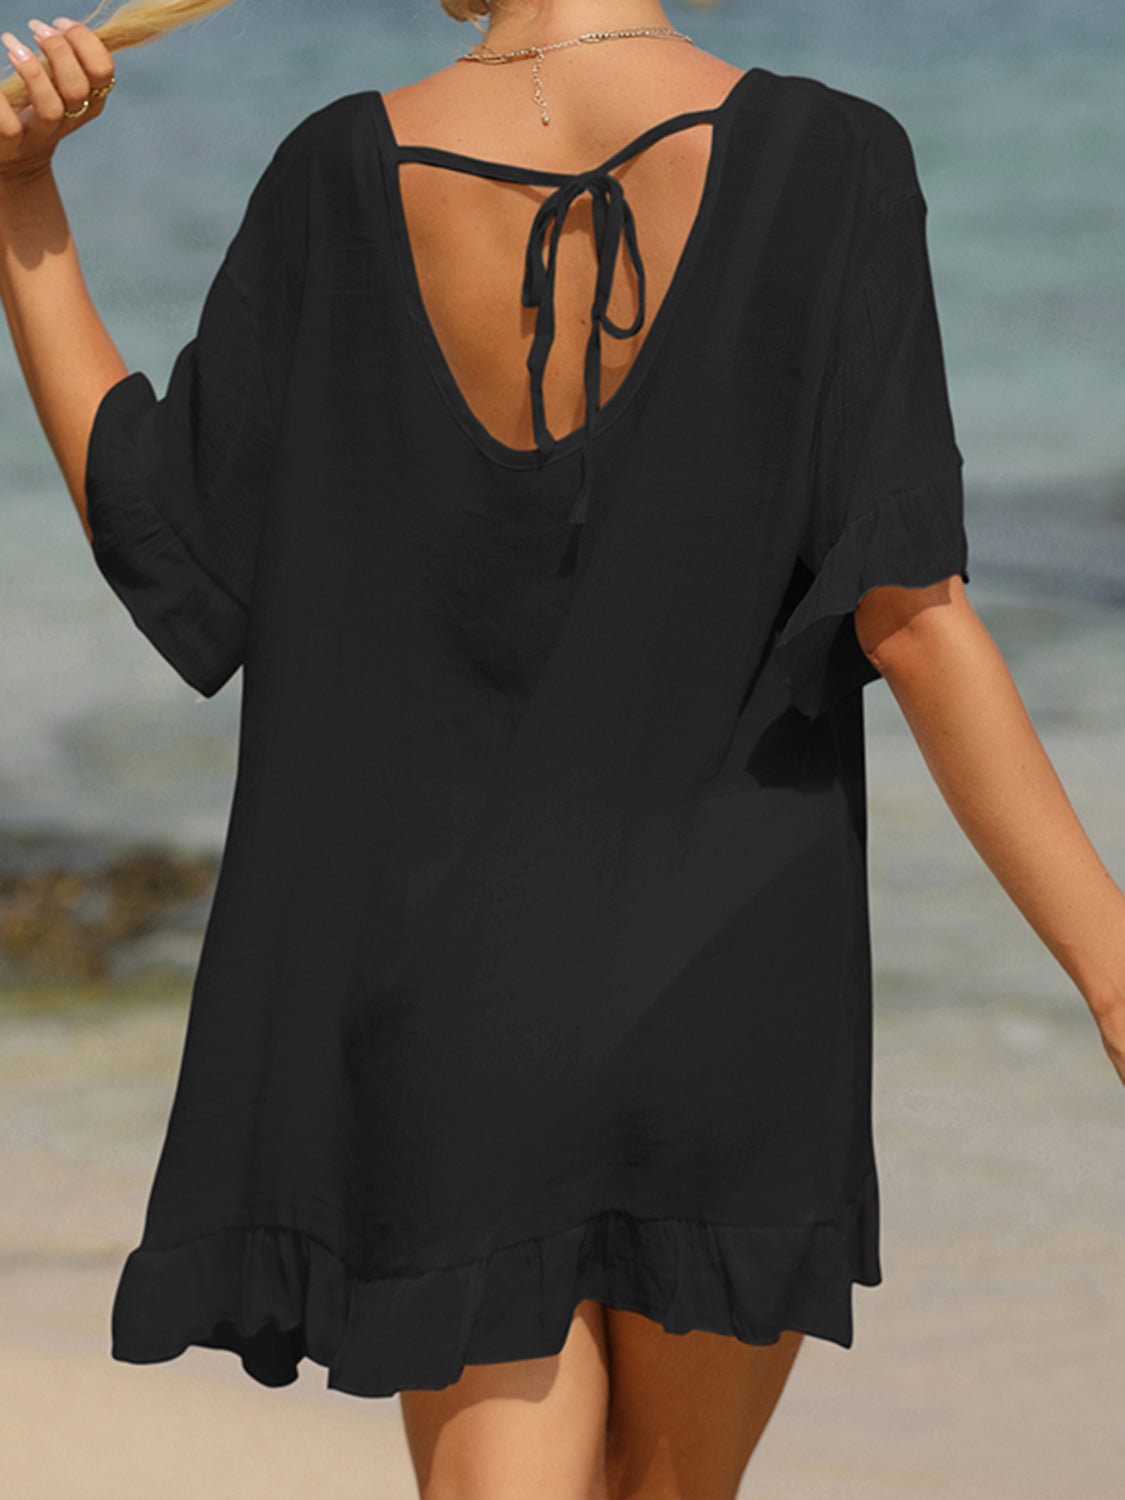 Dive Into Style:  Scoop Neck With Tie Back and Ruffle Sleeve Cover Up